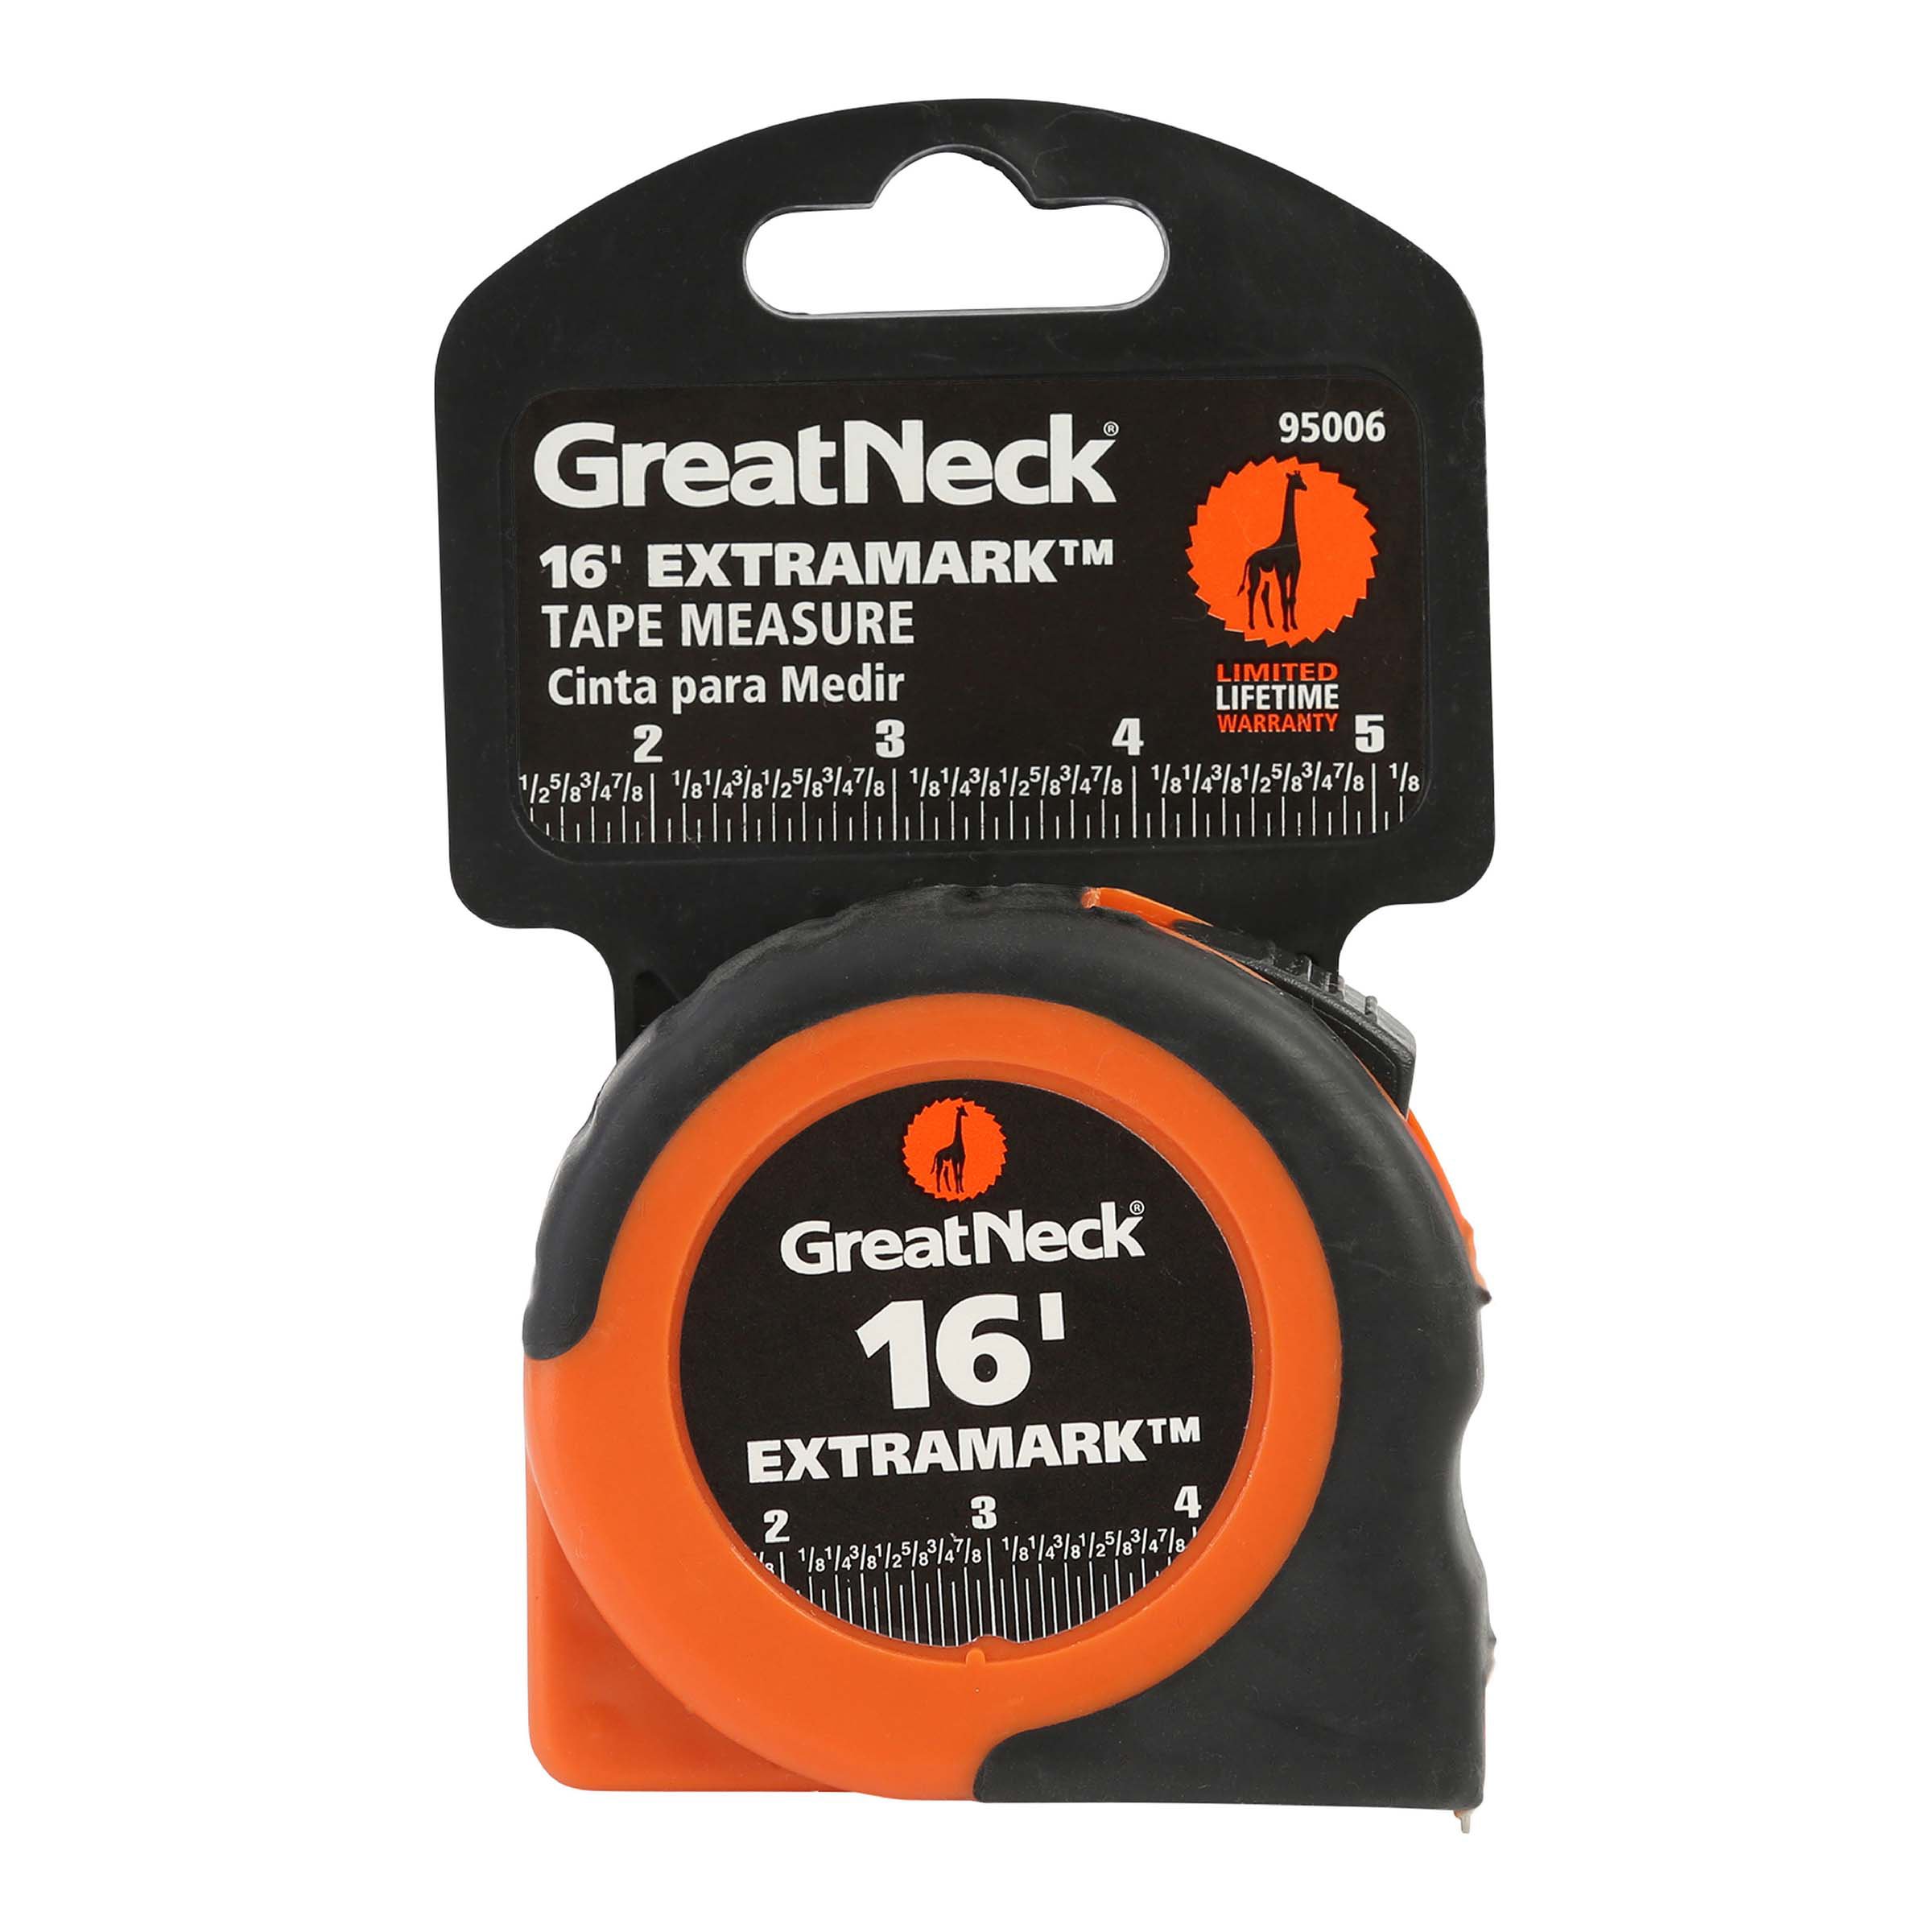 Great Neck ExtraMark™ Rubber Grip Tape Measure - Shop Hand Tools